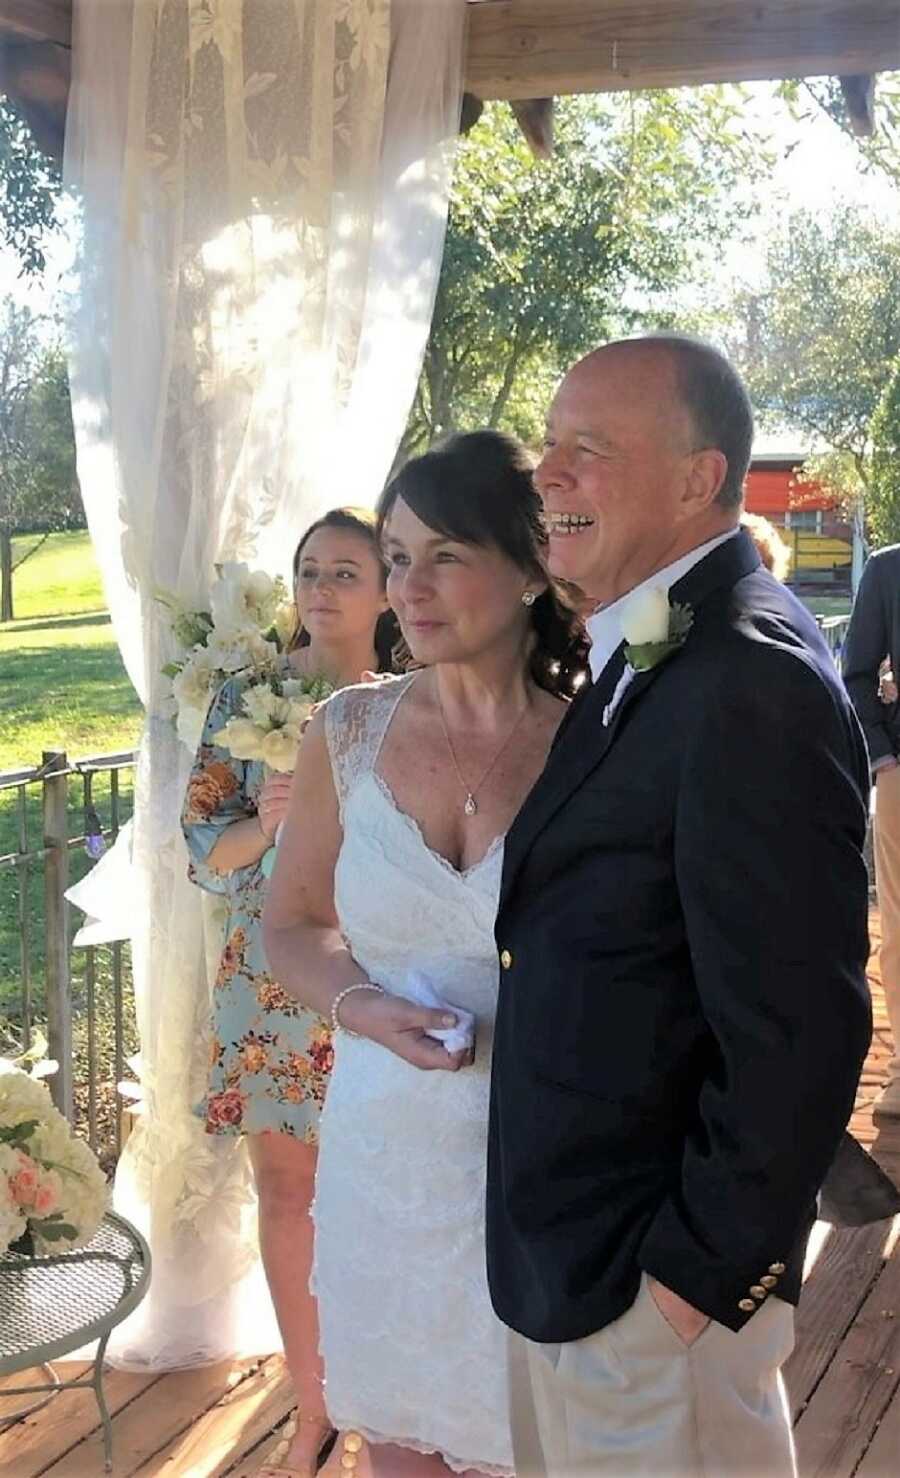 couple celebrates wedding ceremony at at deck after being together for 20 years and husband's cancer diagnosis 